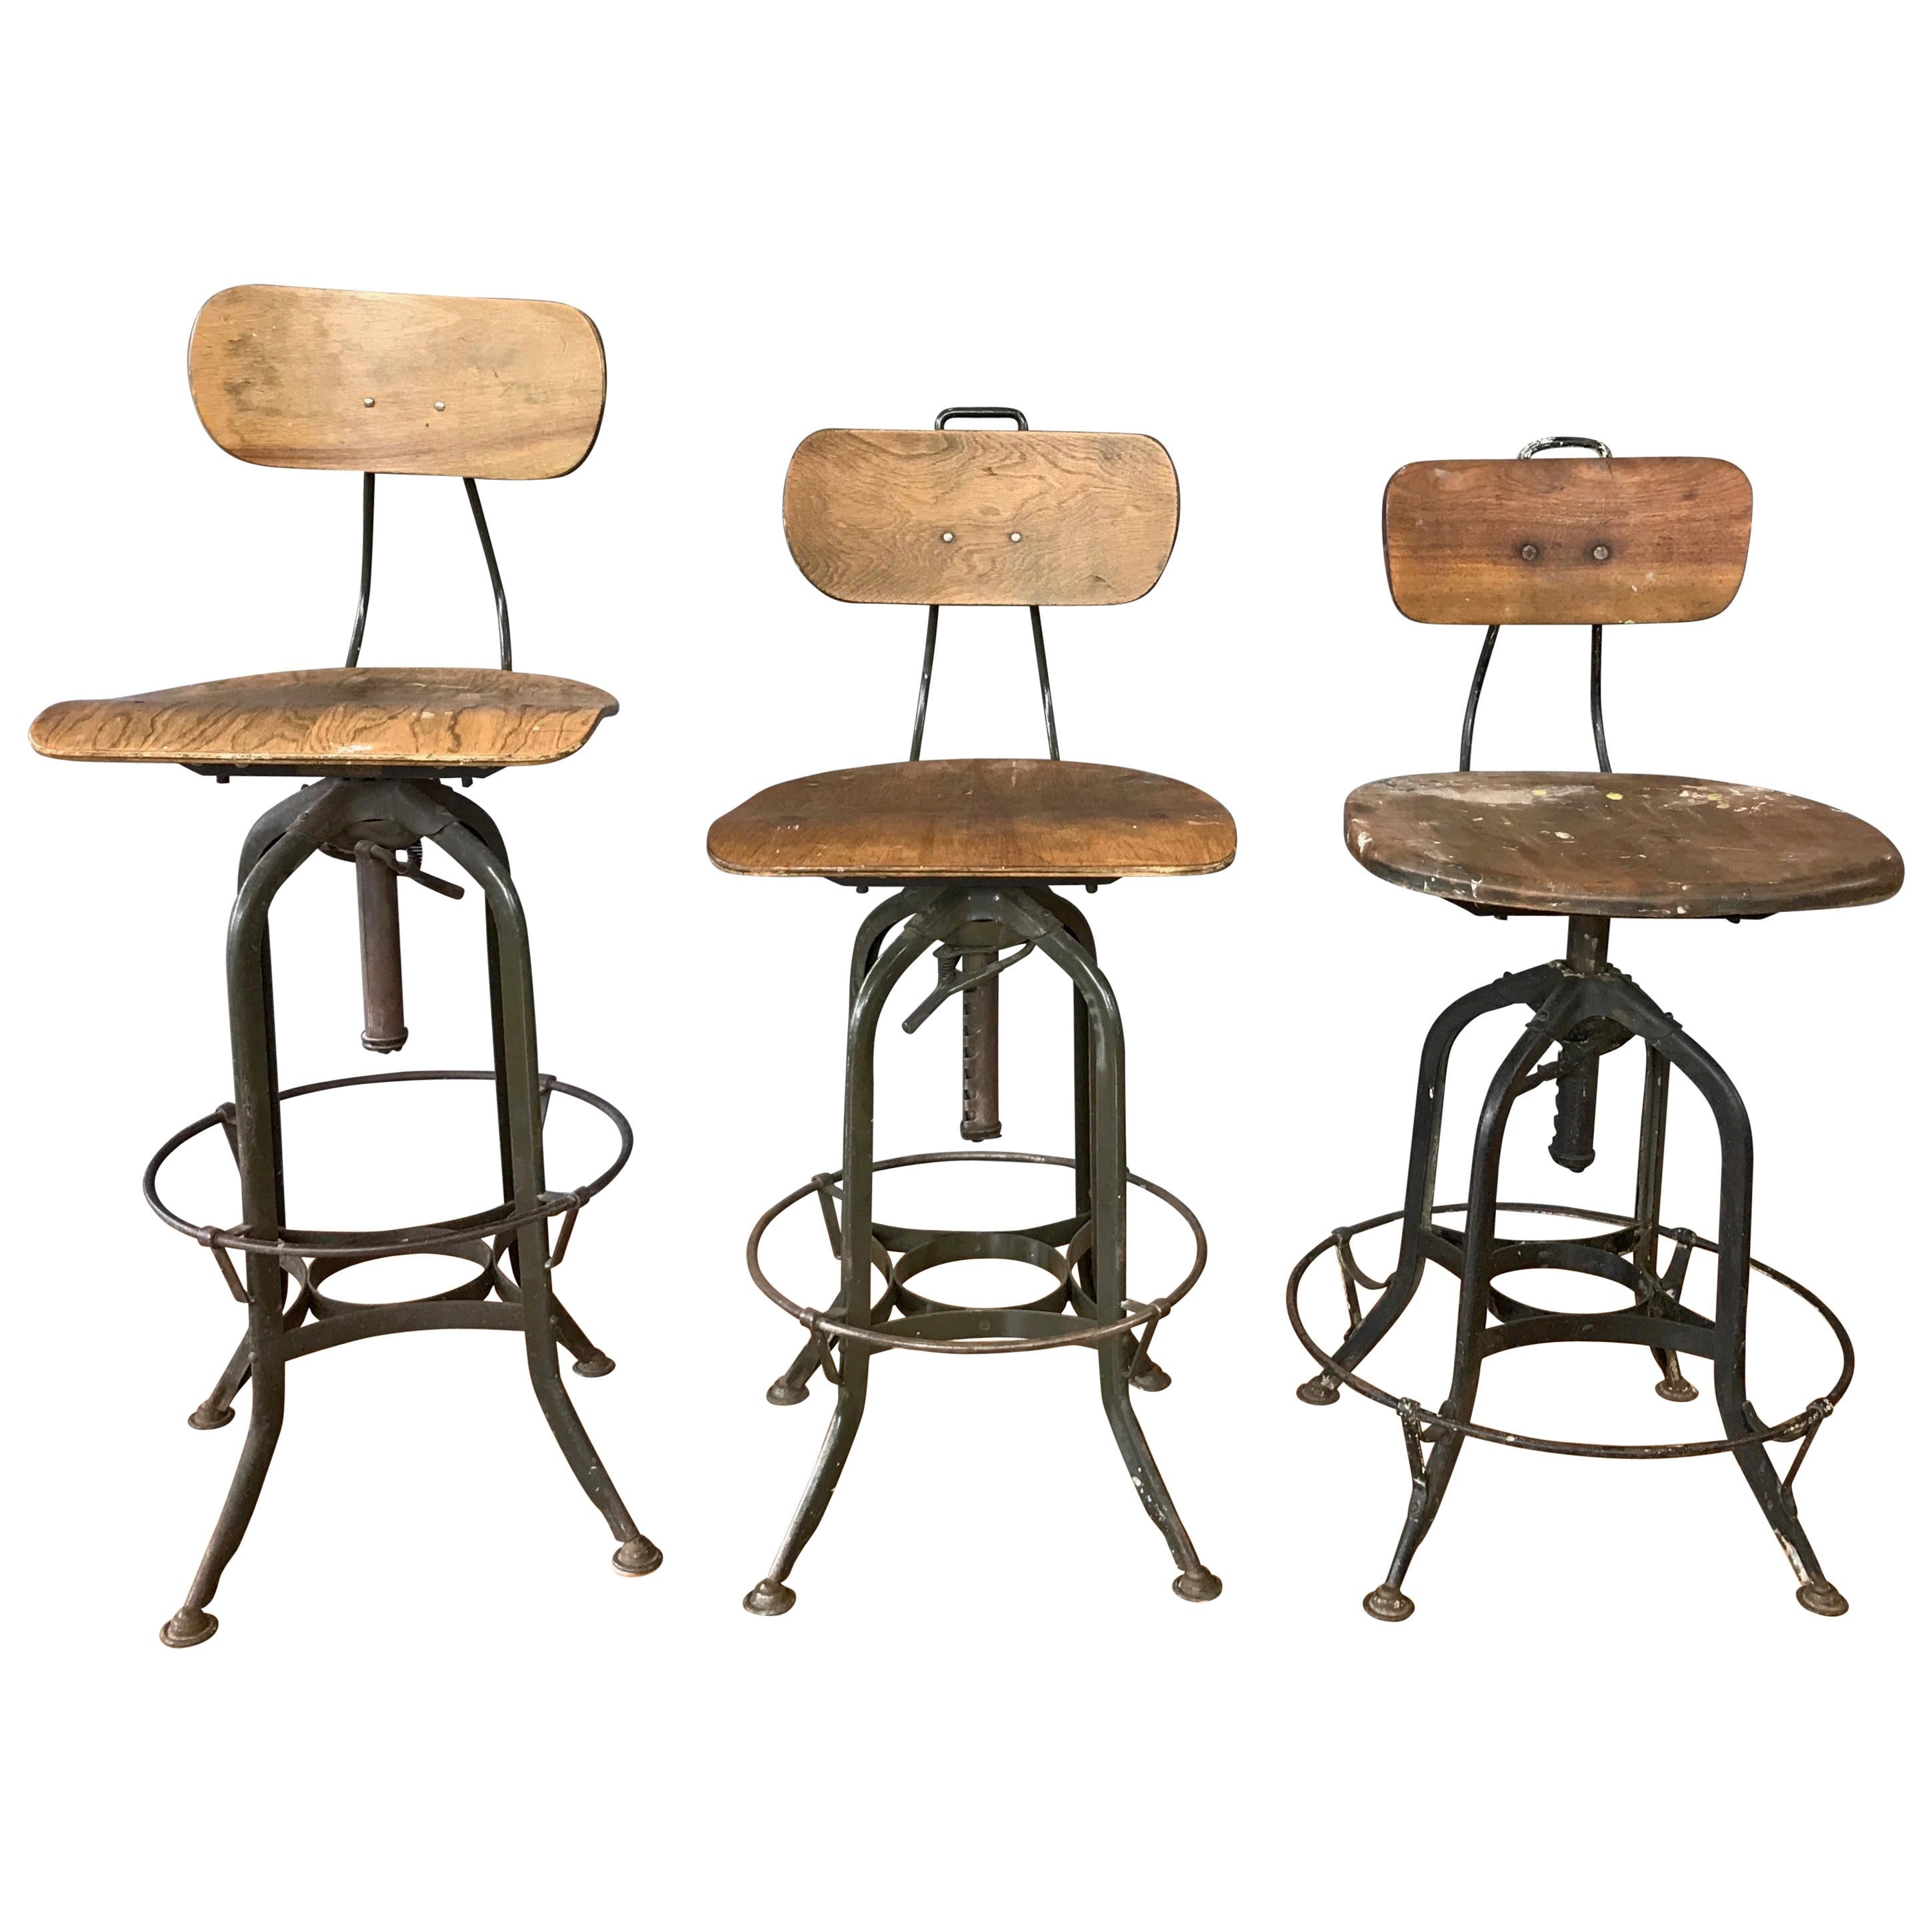 Toledo Industrial Adjustable Height Swivel Stools with Backs, Two Available